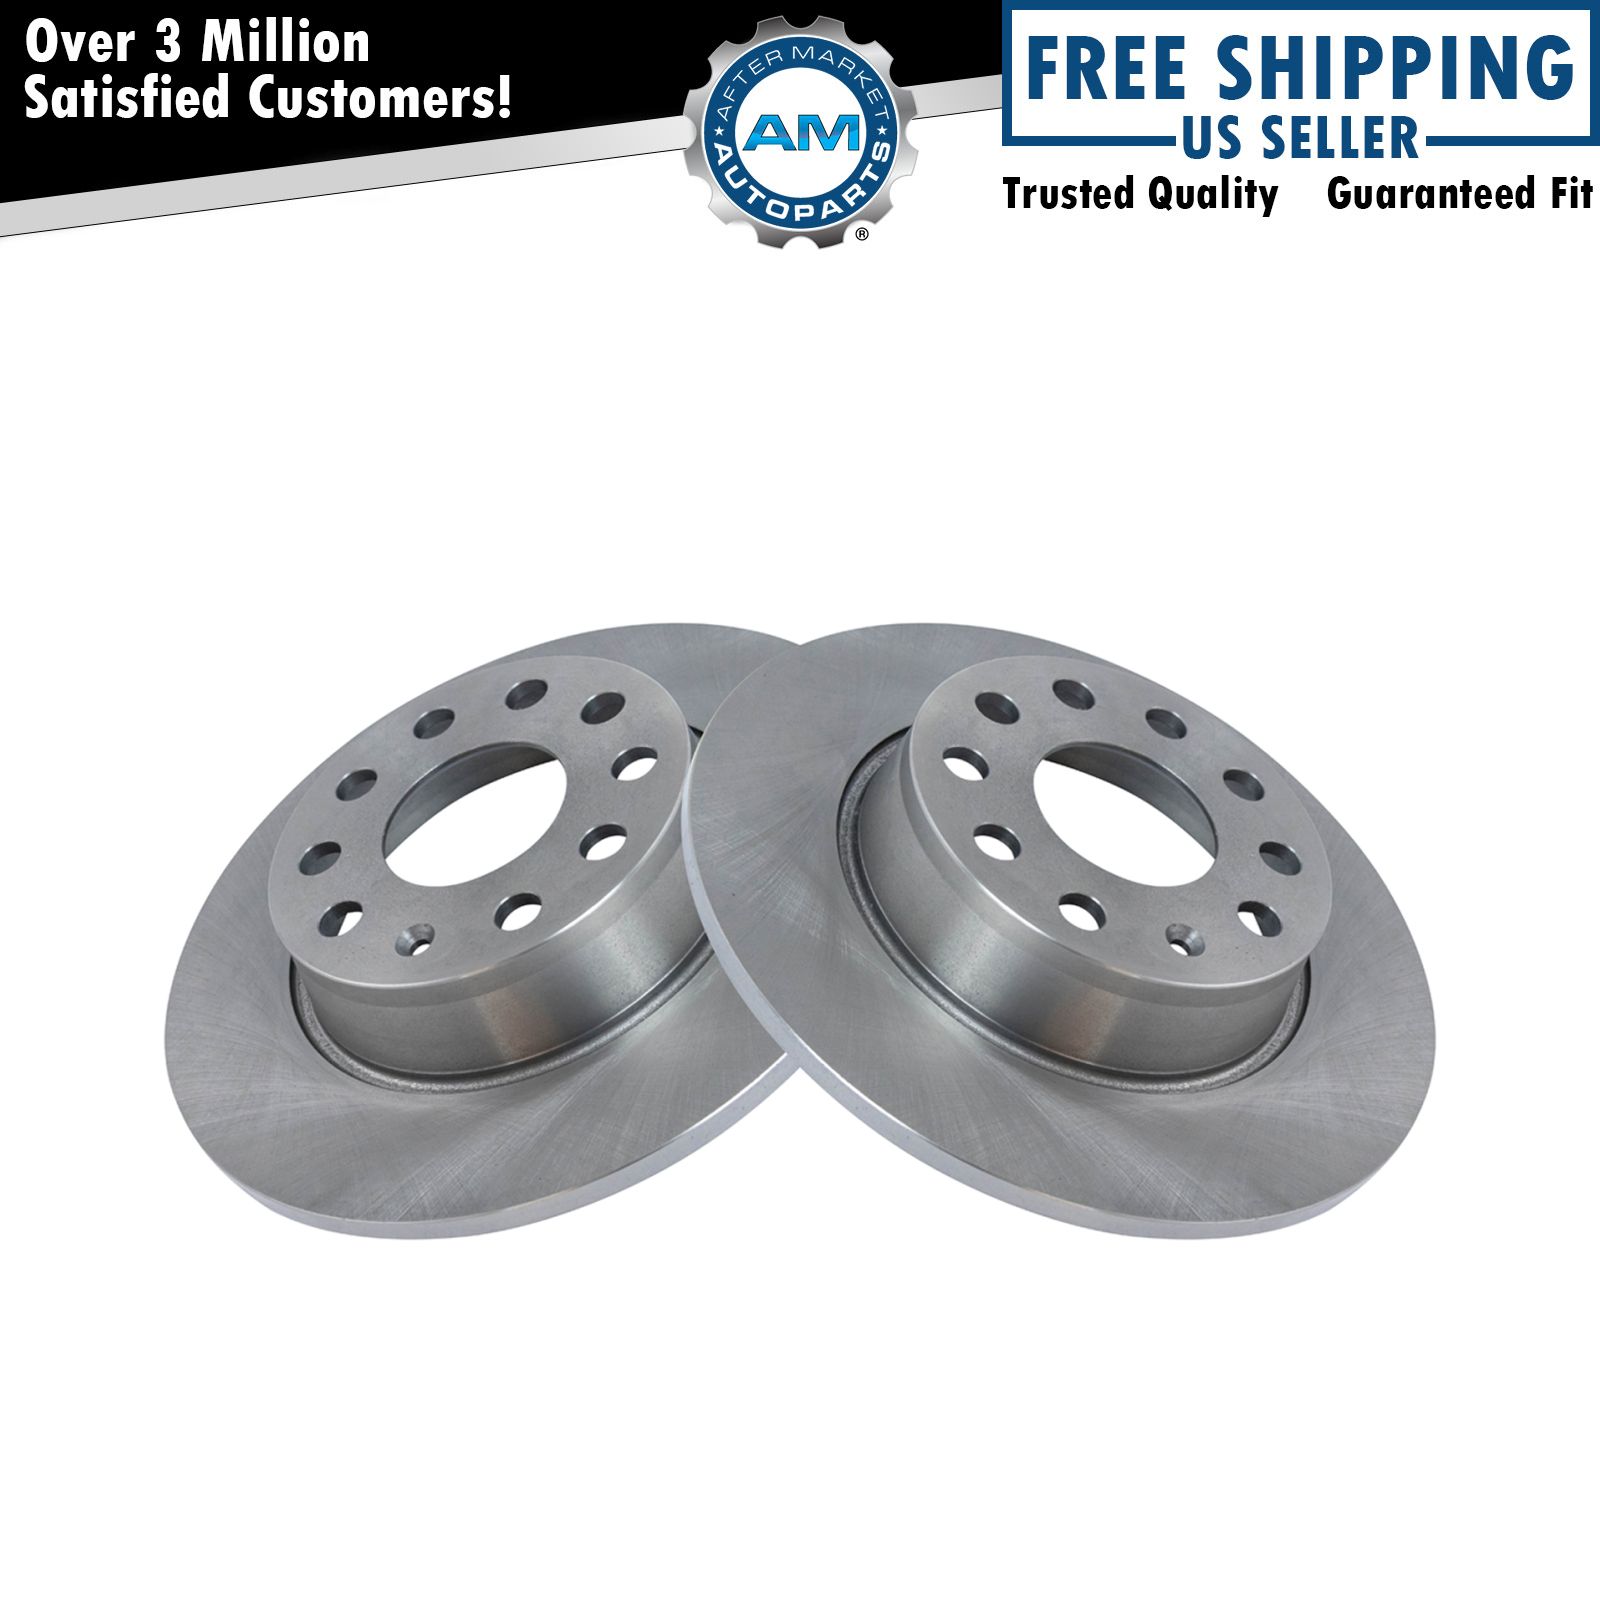 Rear Disc Brake Rotors Left & Right Pair for Audi A3 VW EOS Golf Jetta